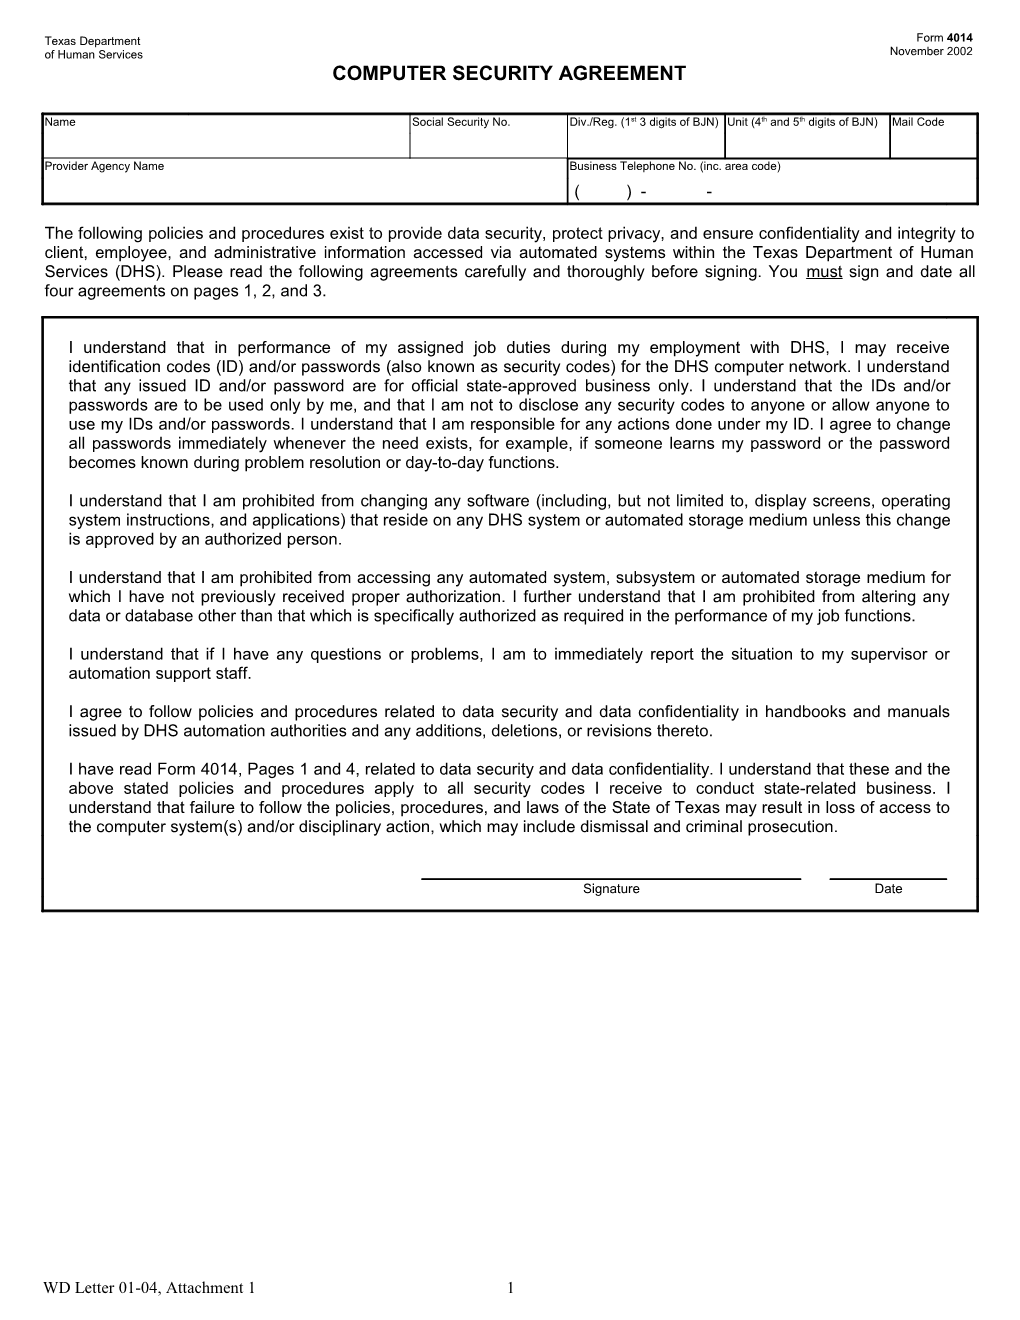 Computer Security Agreement - Prs